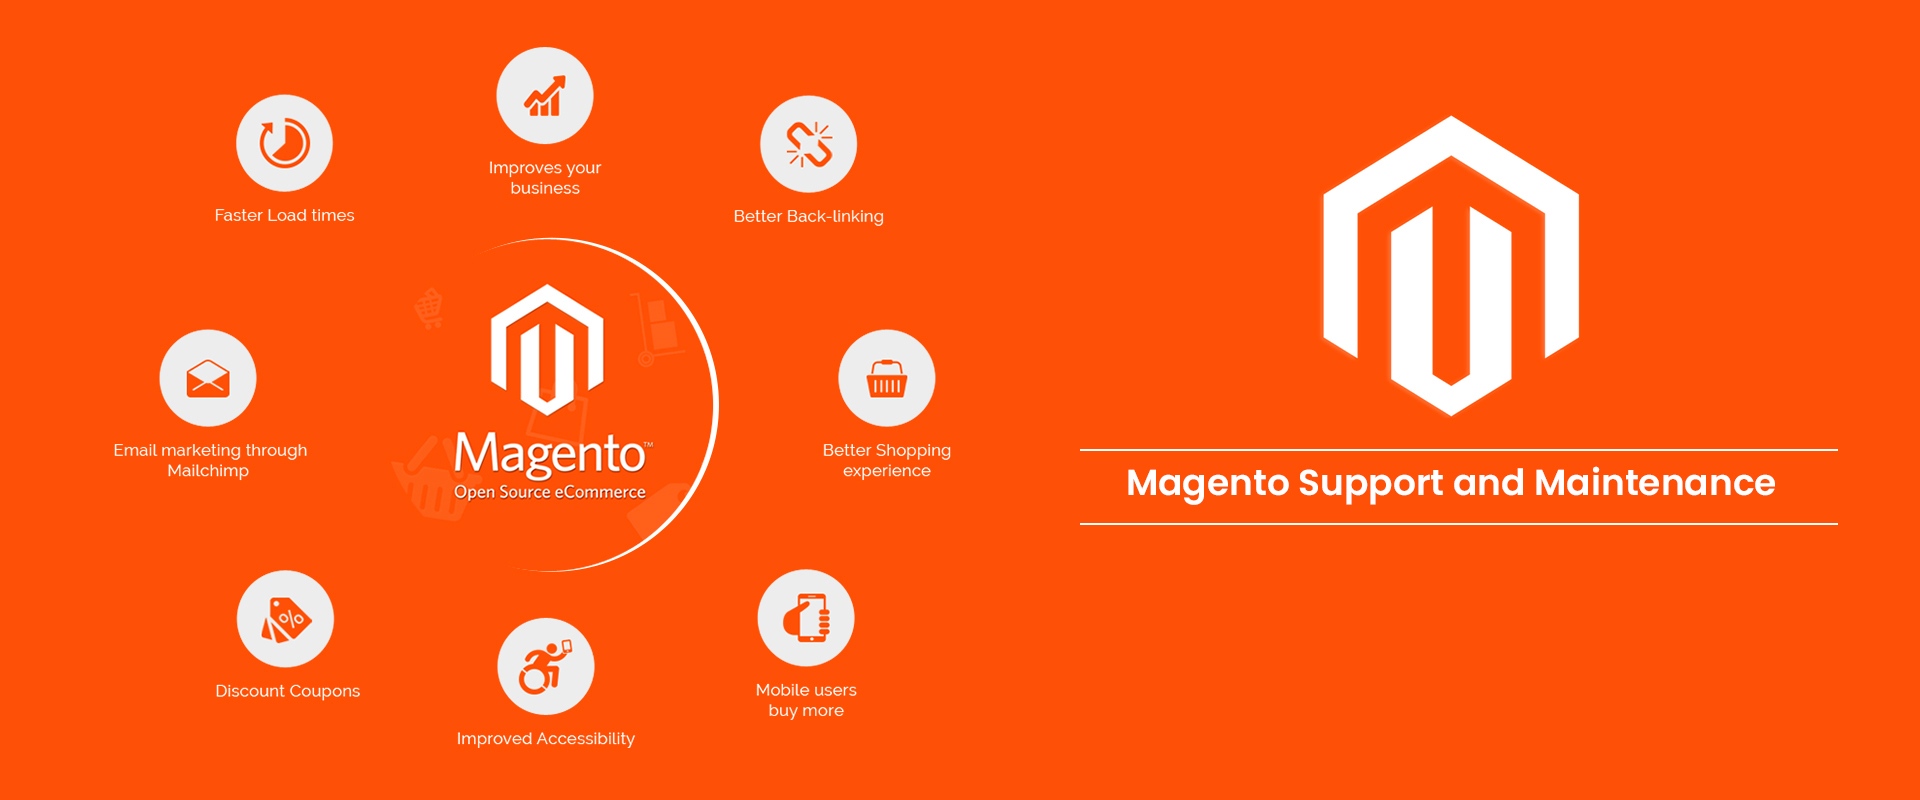 Magento Support and Maintenance